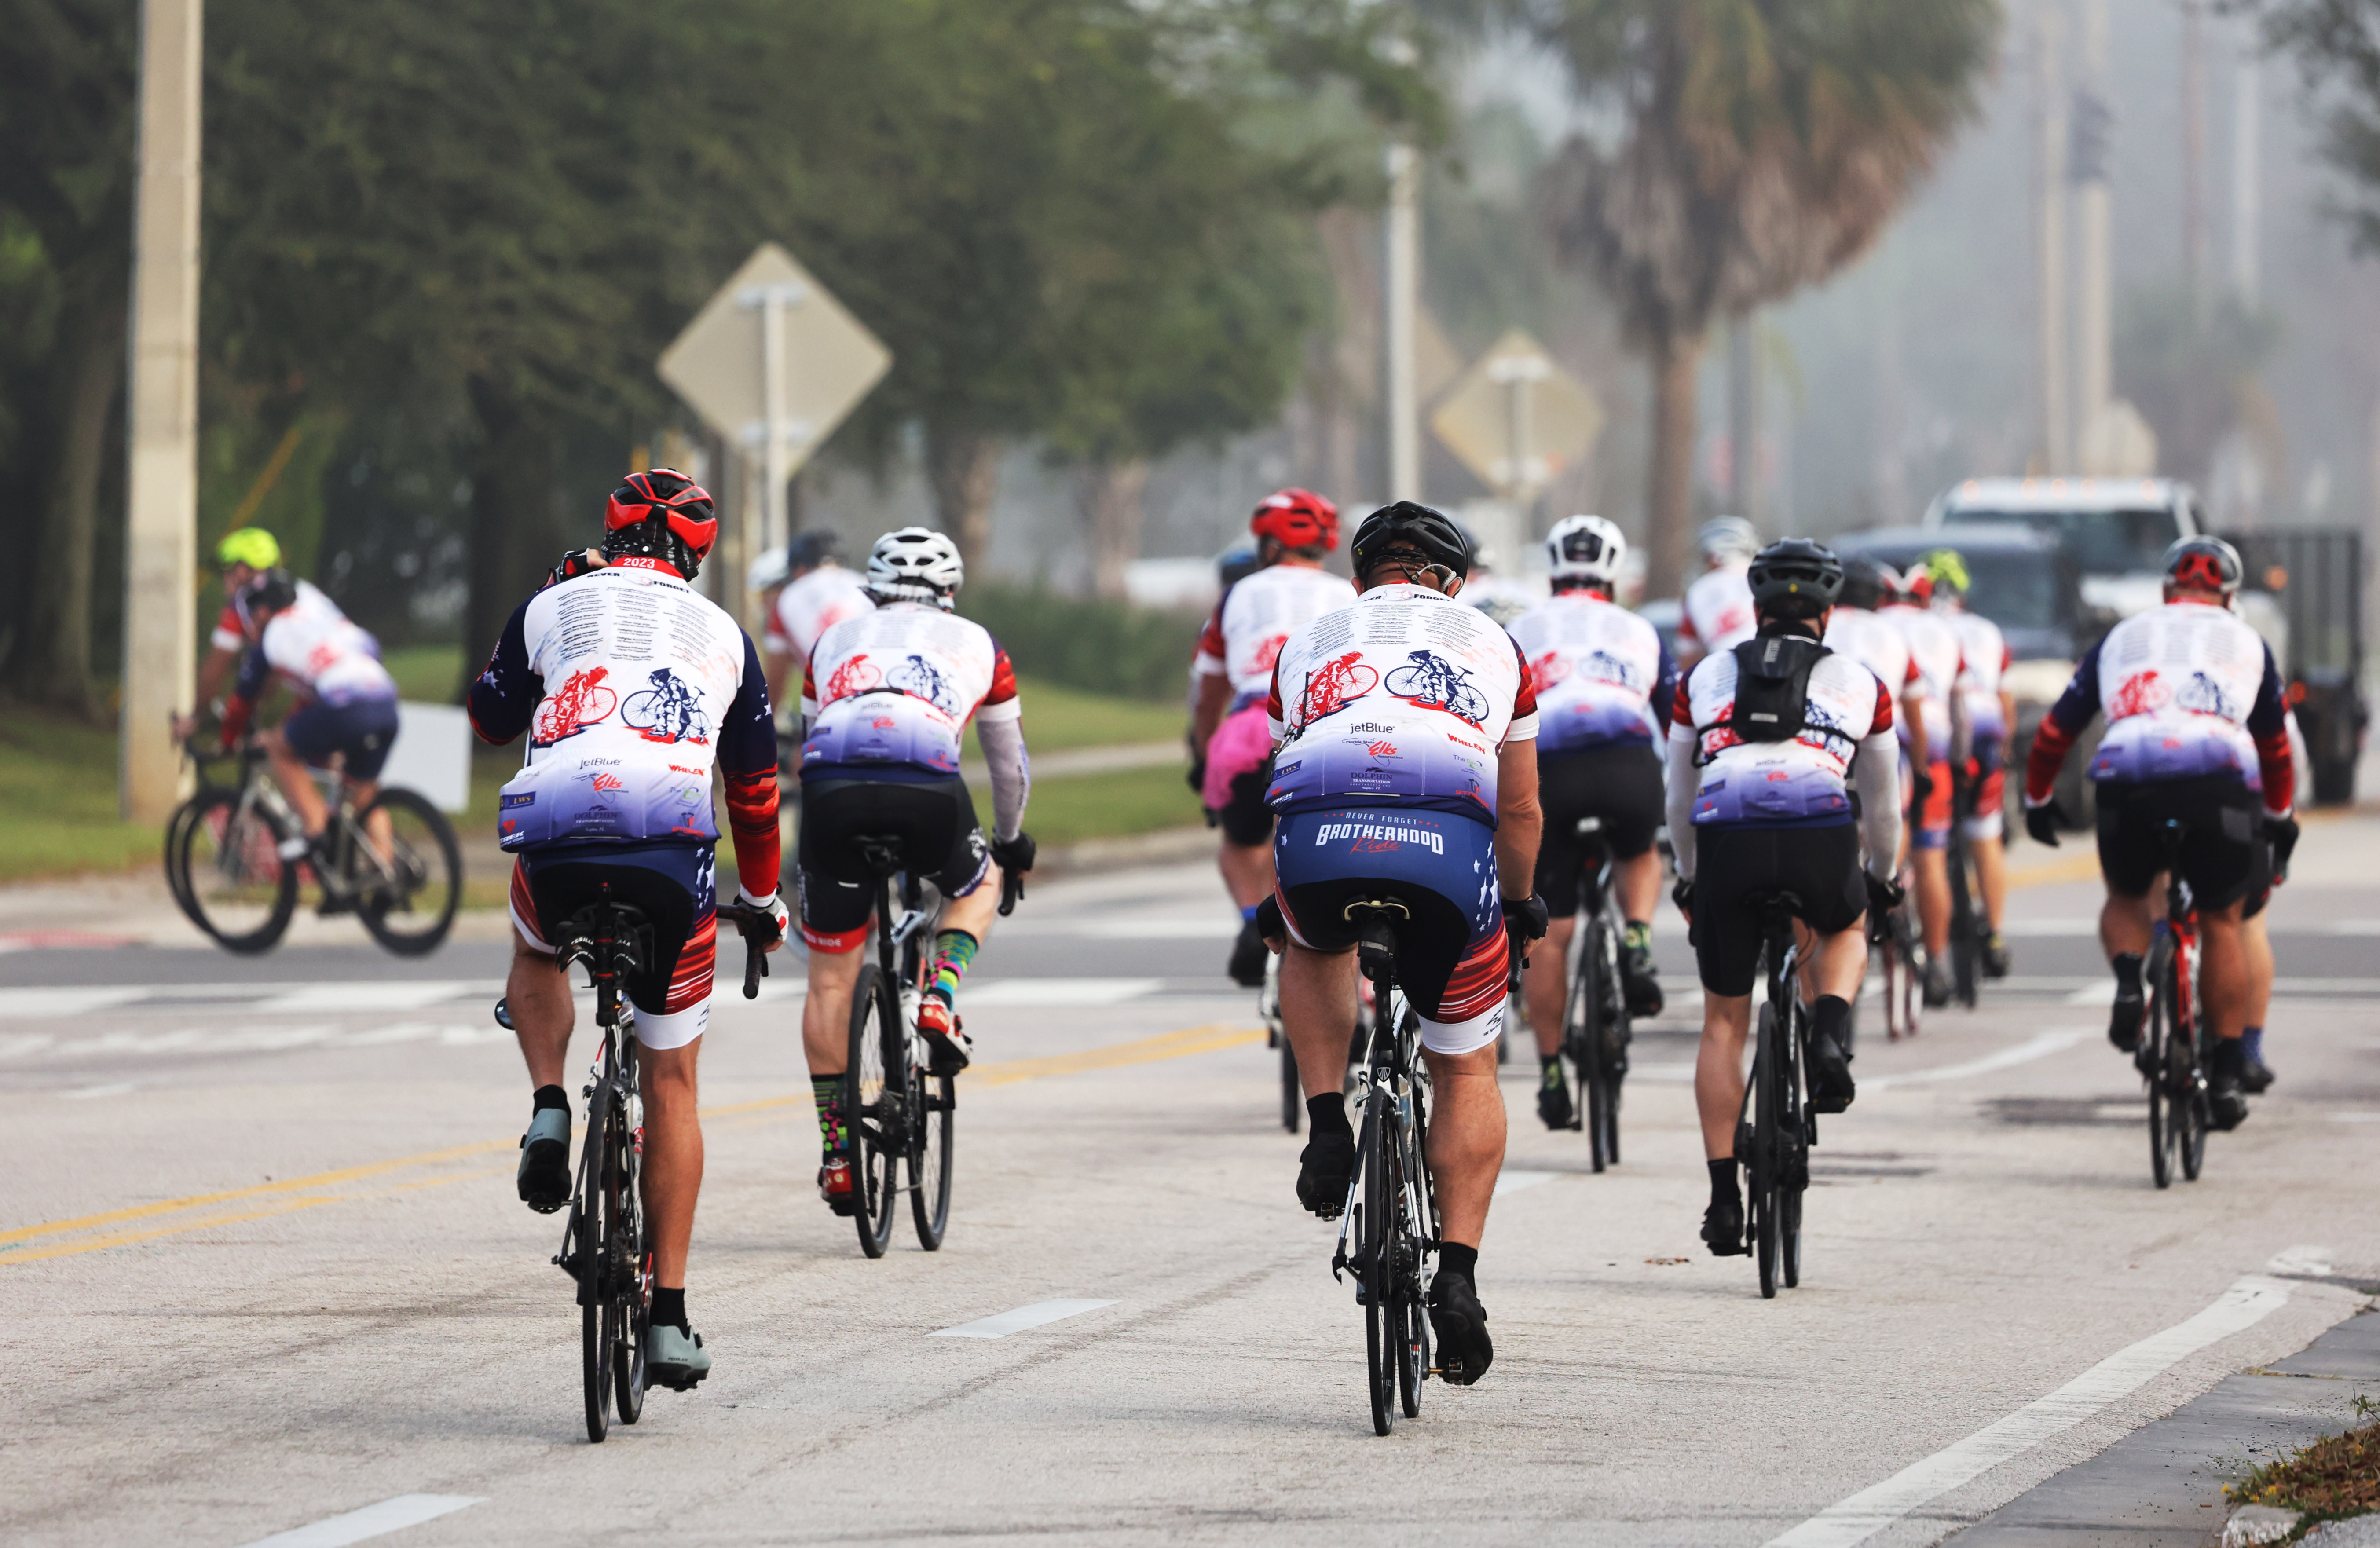 Cyclist participating in the Brotherhood Ride turn onto Robinson Street, on their way to Cocoa Beach, on Tuesday, October 31, 2023. The ride is dedicated to the 28 Florida Fallen First Responders who died in the line of duty in 2022 while protecting their communities. They started in Naples and will end their 9-day ride through Florida in Miami.(Ricardo Ramirez Buxeda/ Orlando Sentinel)